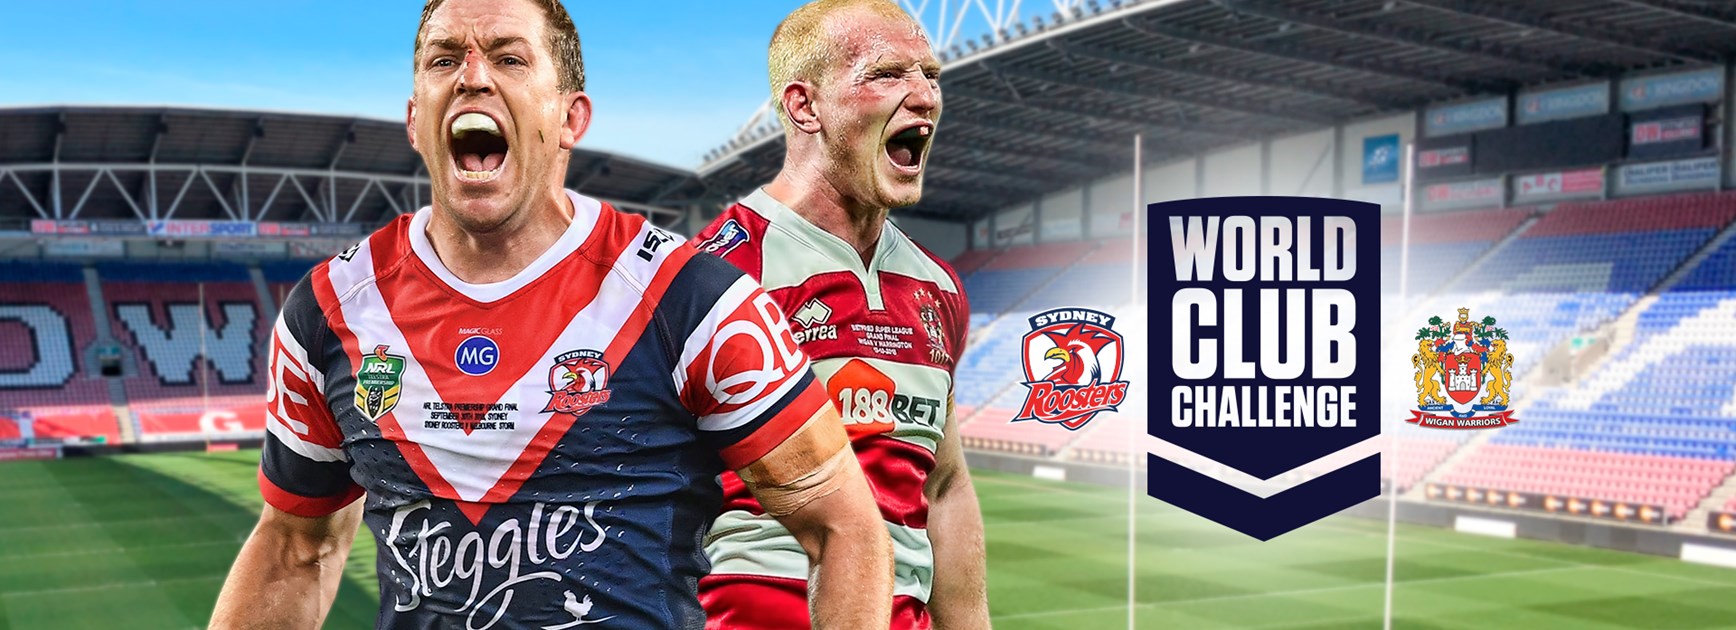 Roosters World Club Challenge Tour